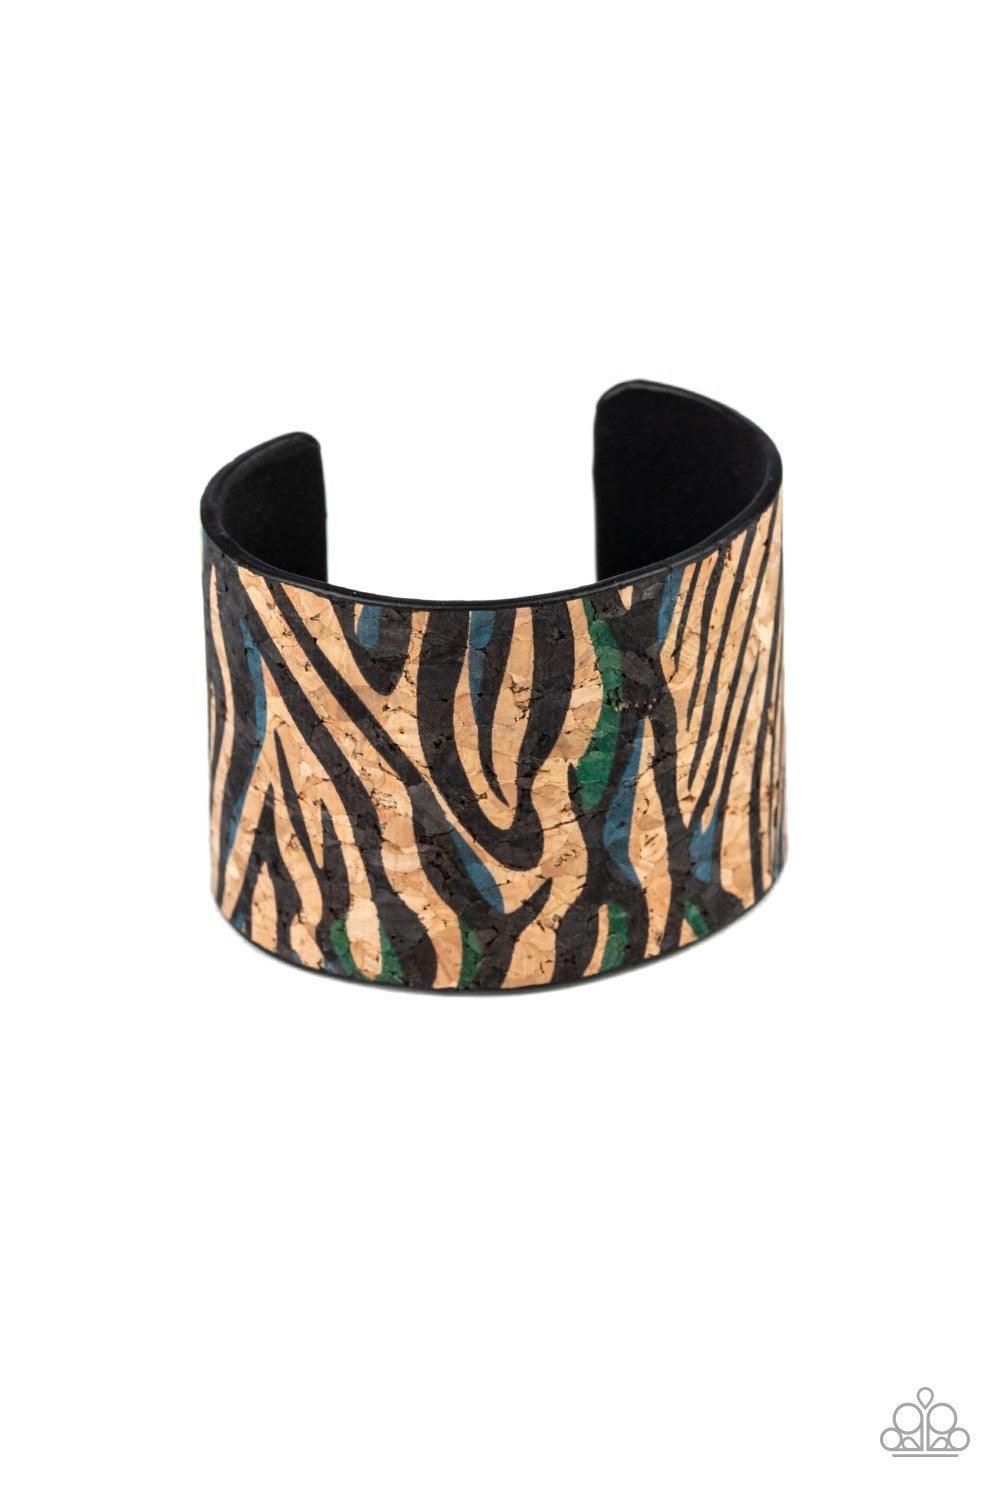 Paparazzi Accessories Show Your True Stripes - Blue Black, blue, and green zebra stripes are printed across the front of a cork-like cuff for an adventurous look. Jewelry